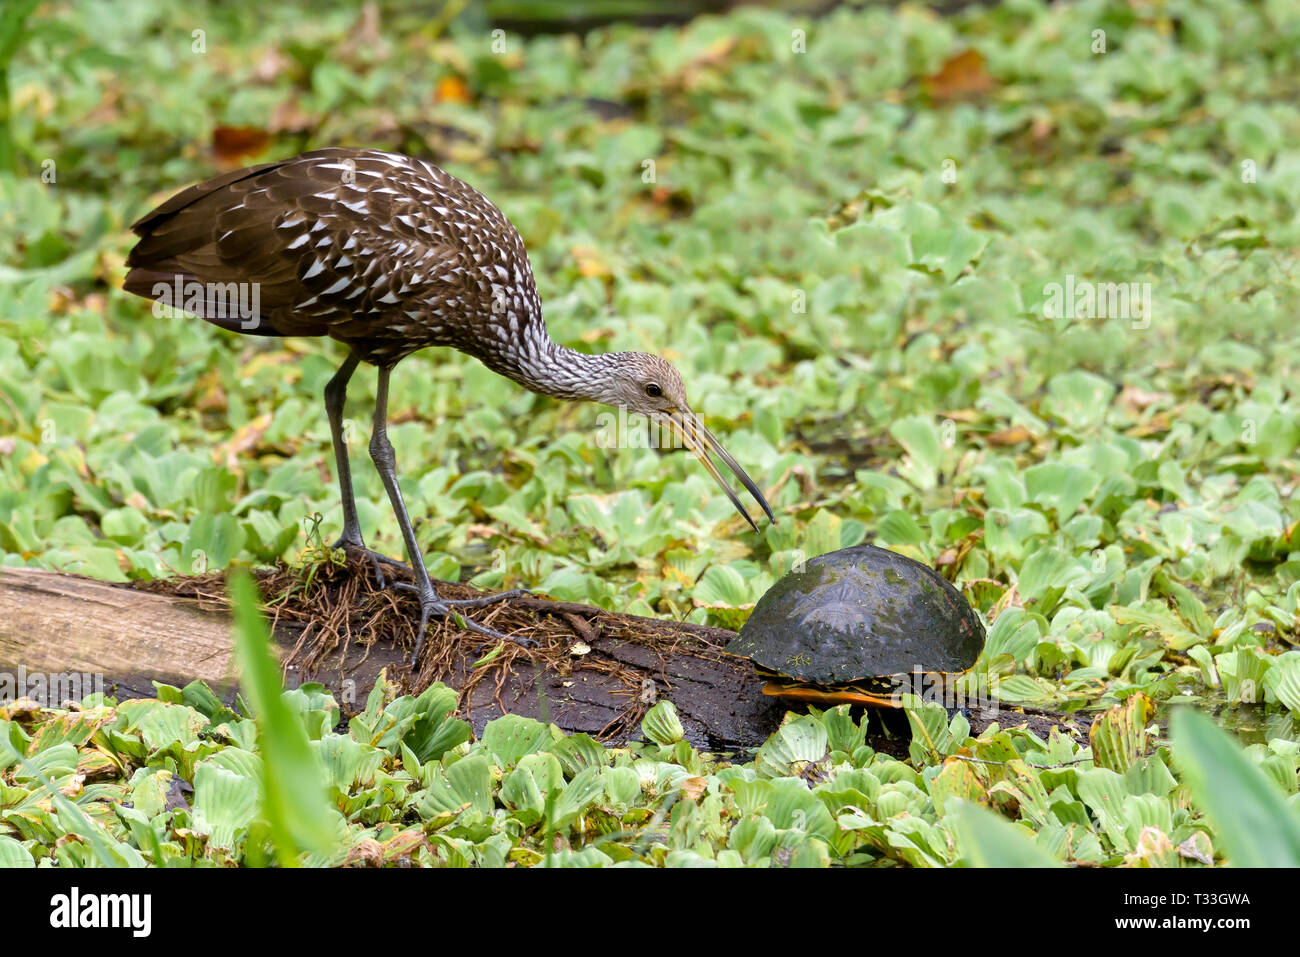 A limpkin (Aramus guarauna) and a Florida red-bellied cooter (Pseudemys nelsoni) on a log surrounded by water cabbage in Corkscrew Swamp Sanctuary, Fl Stock Photo